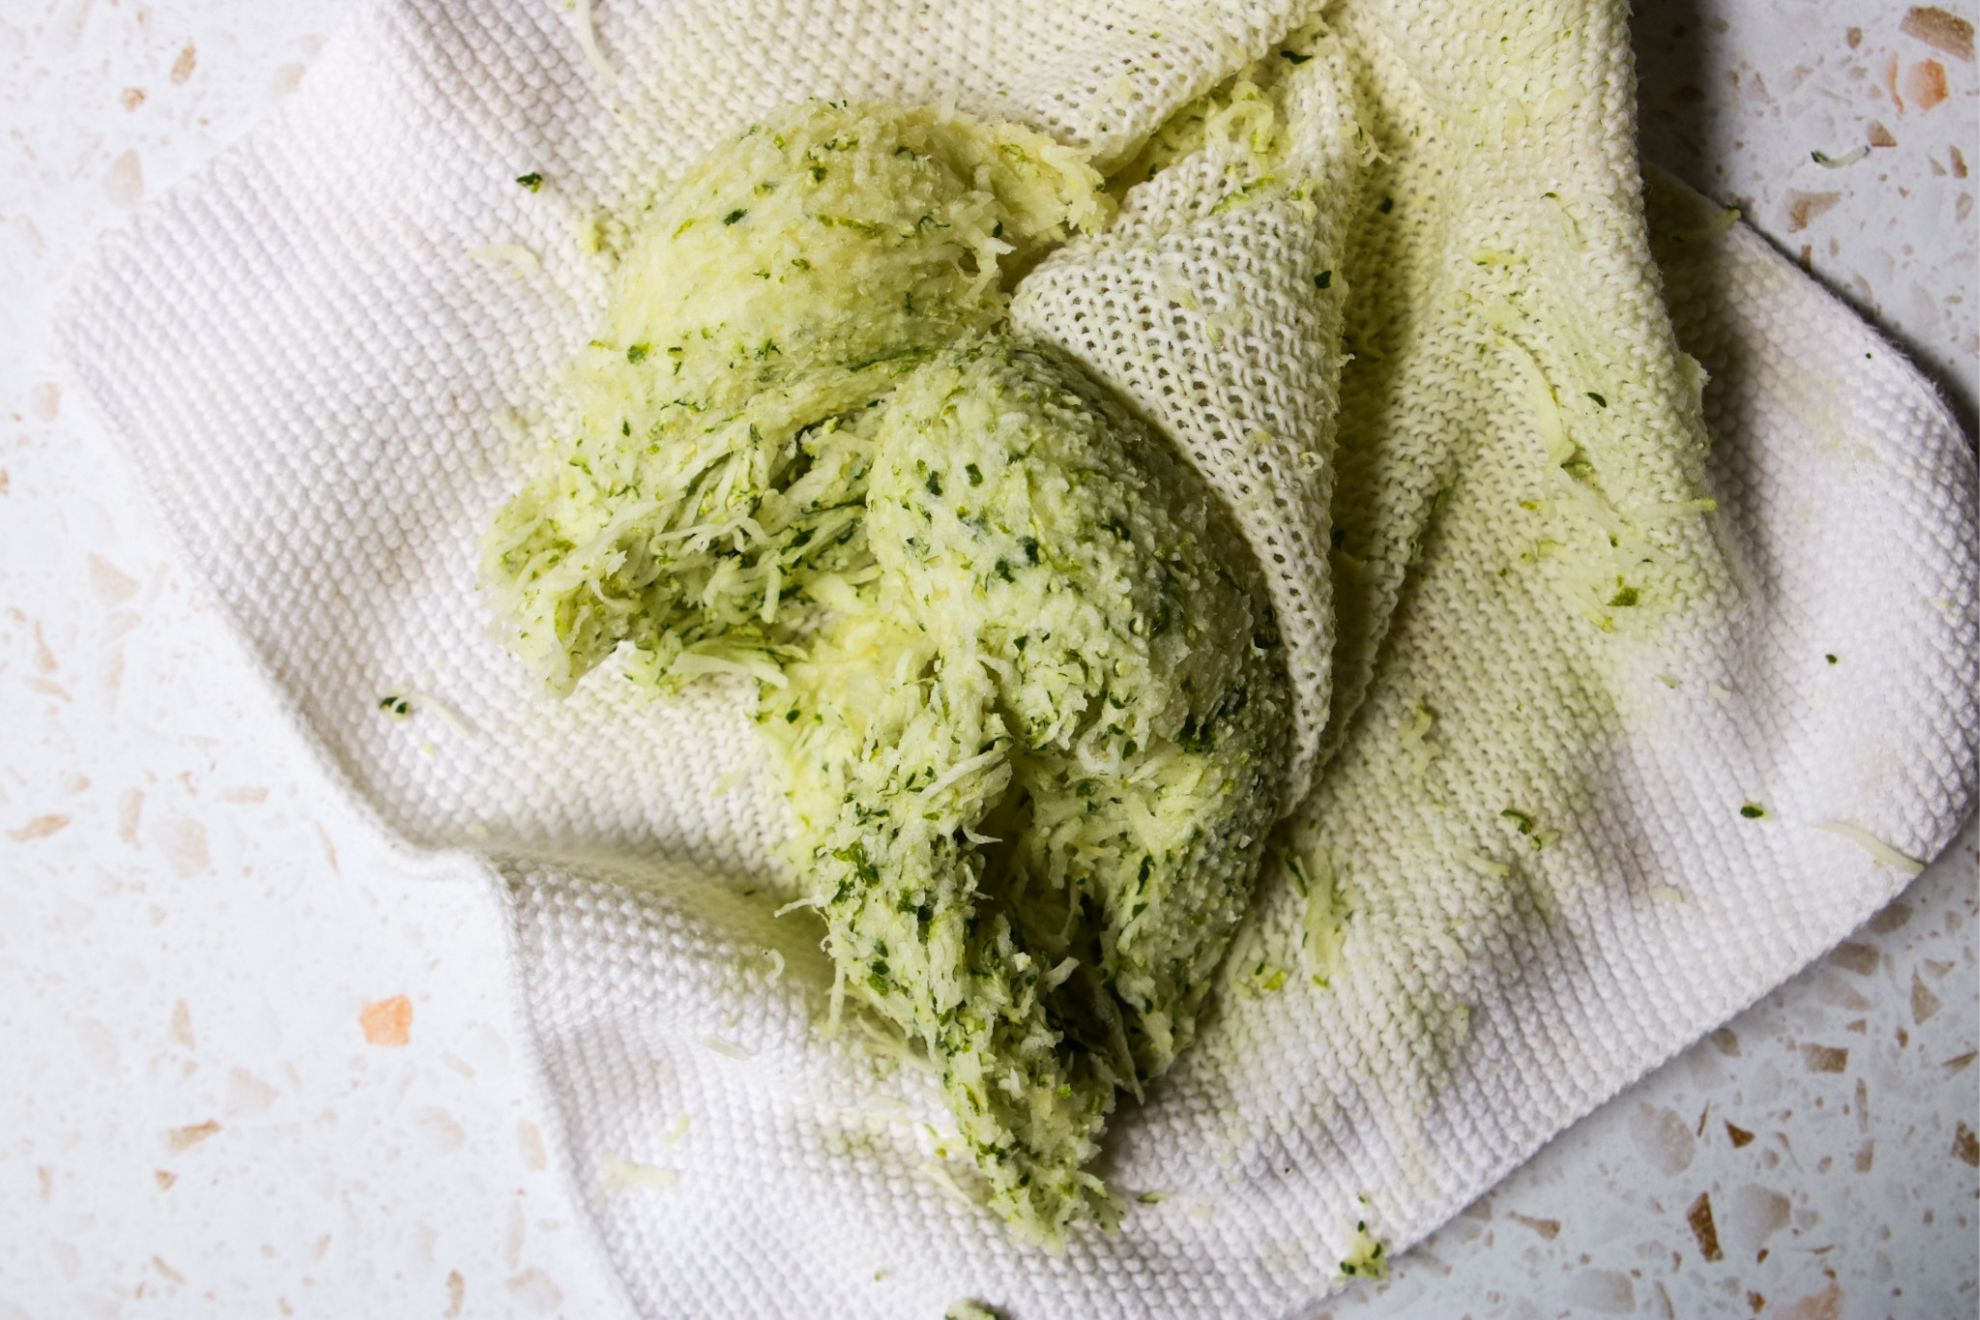 This is an overhead horizontal image of mounds of shredded zucchini on a white knitted towel. The shredded zucchini has been squeezed and so the mounds of zucchini are compressed and the towel has light green stains on it. The towel sits on a white terrazzo surface.